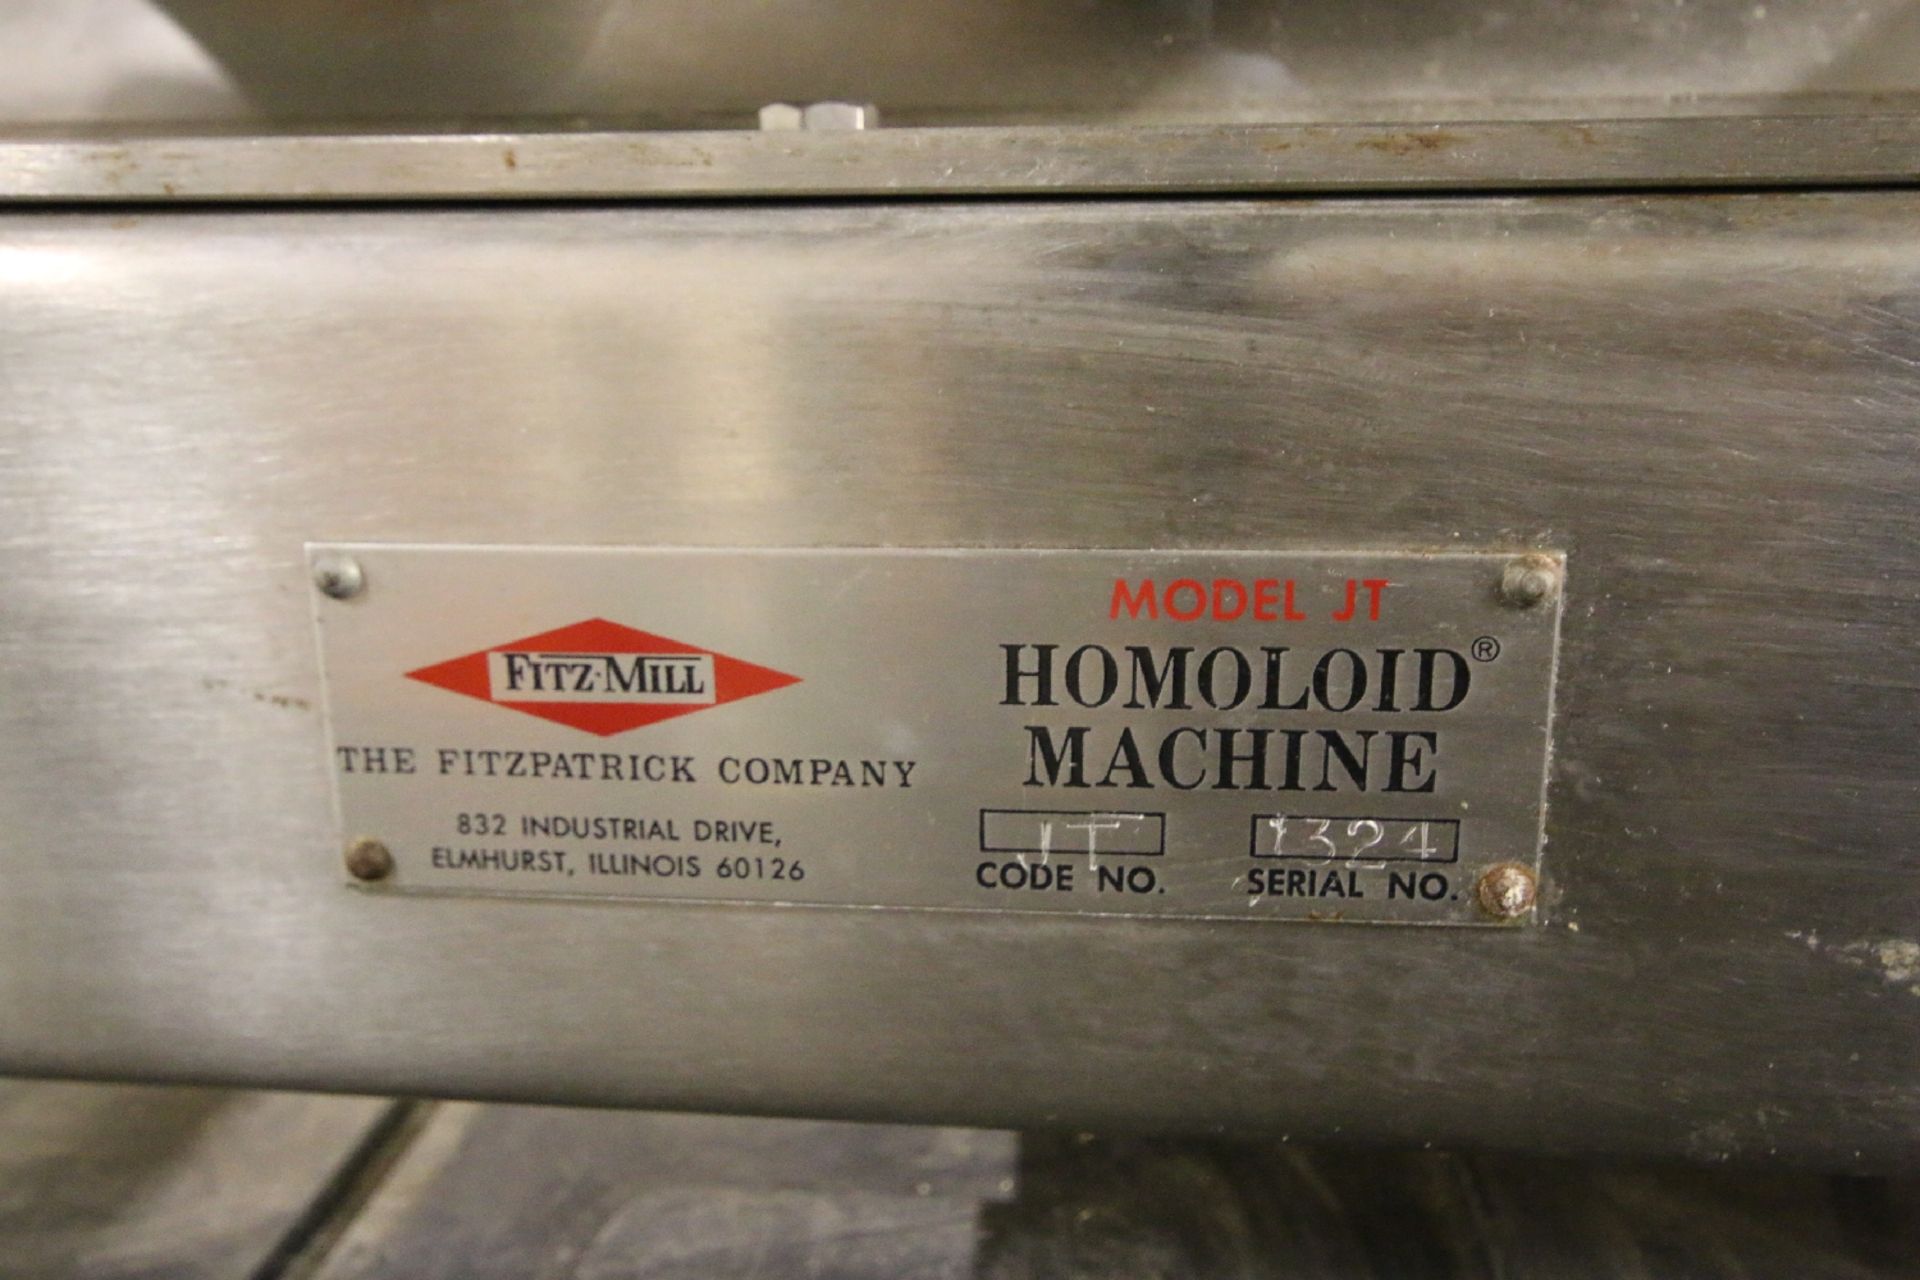 FitzMill Model JT Homoloid Machine, Processes High Volume of Liquid & Dry Product - Image 6 of 8